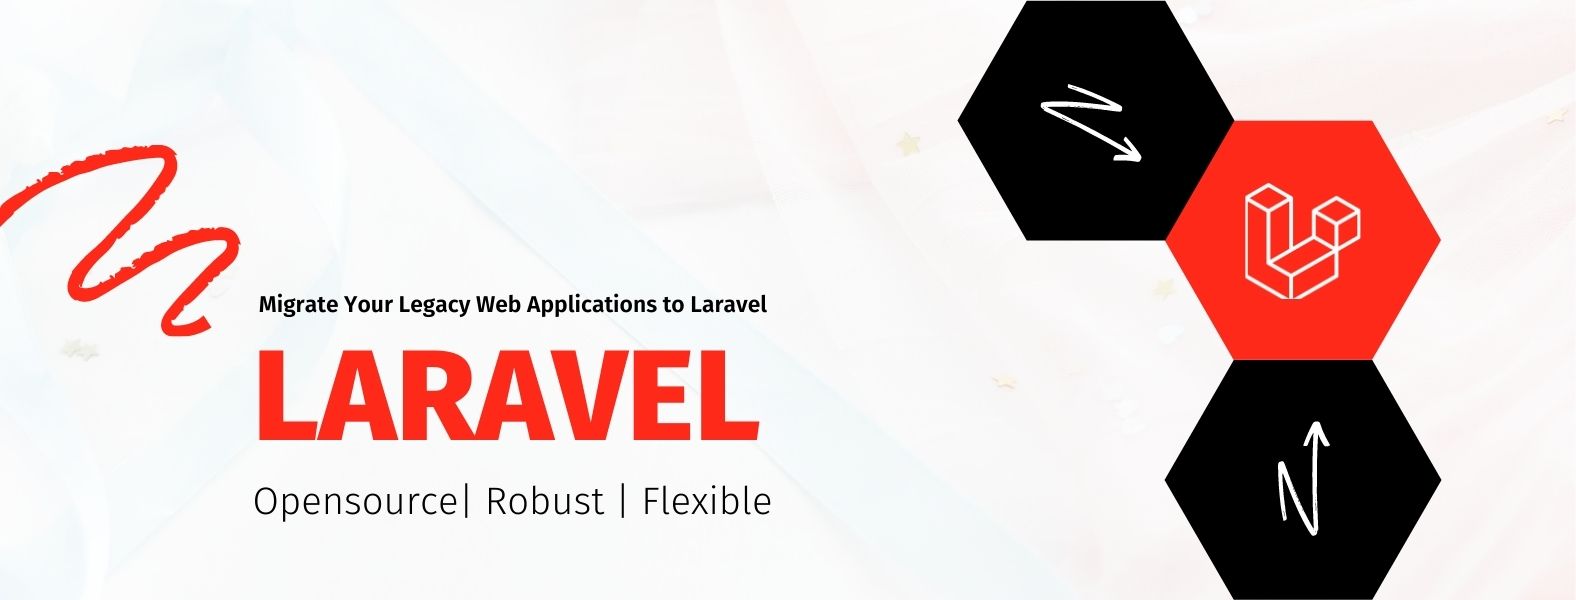 Migrating Your Legacy Web Applications to Laravel  cover image